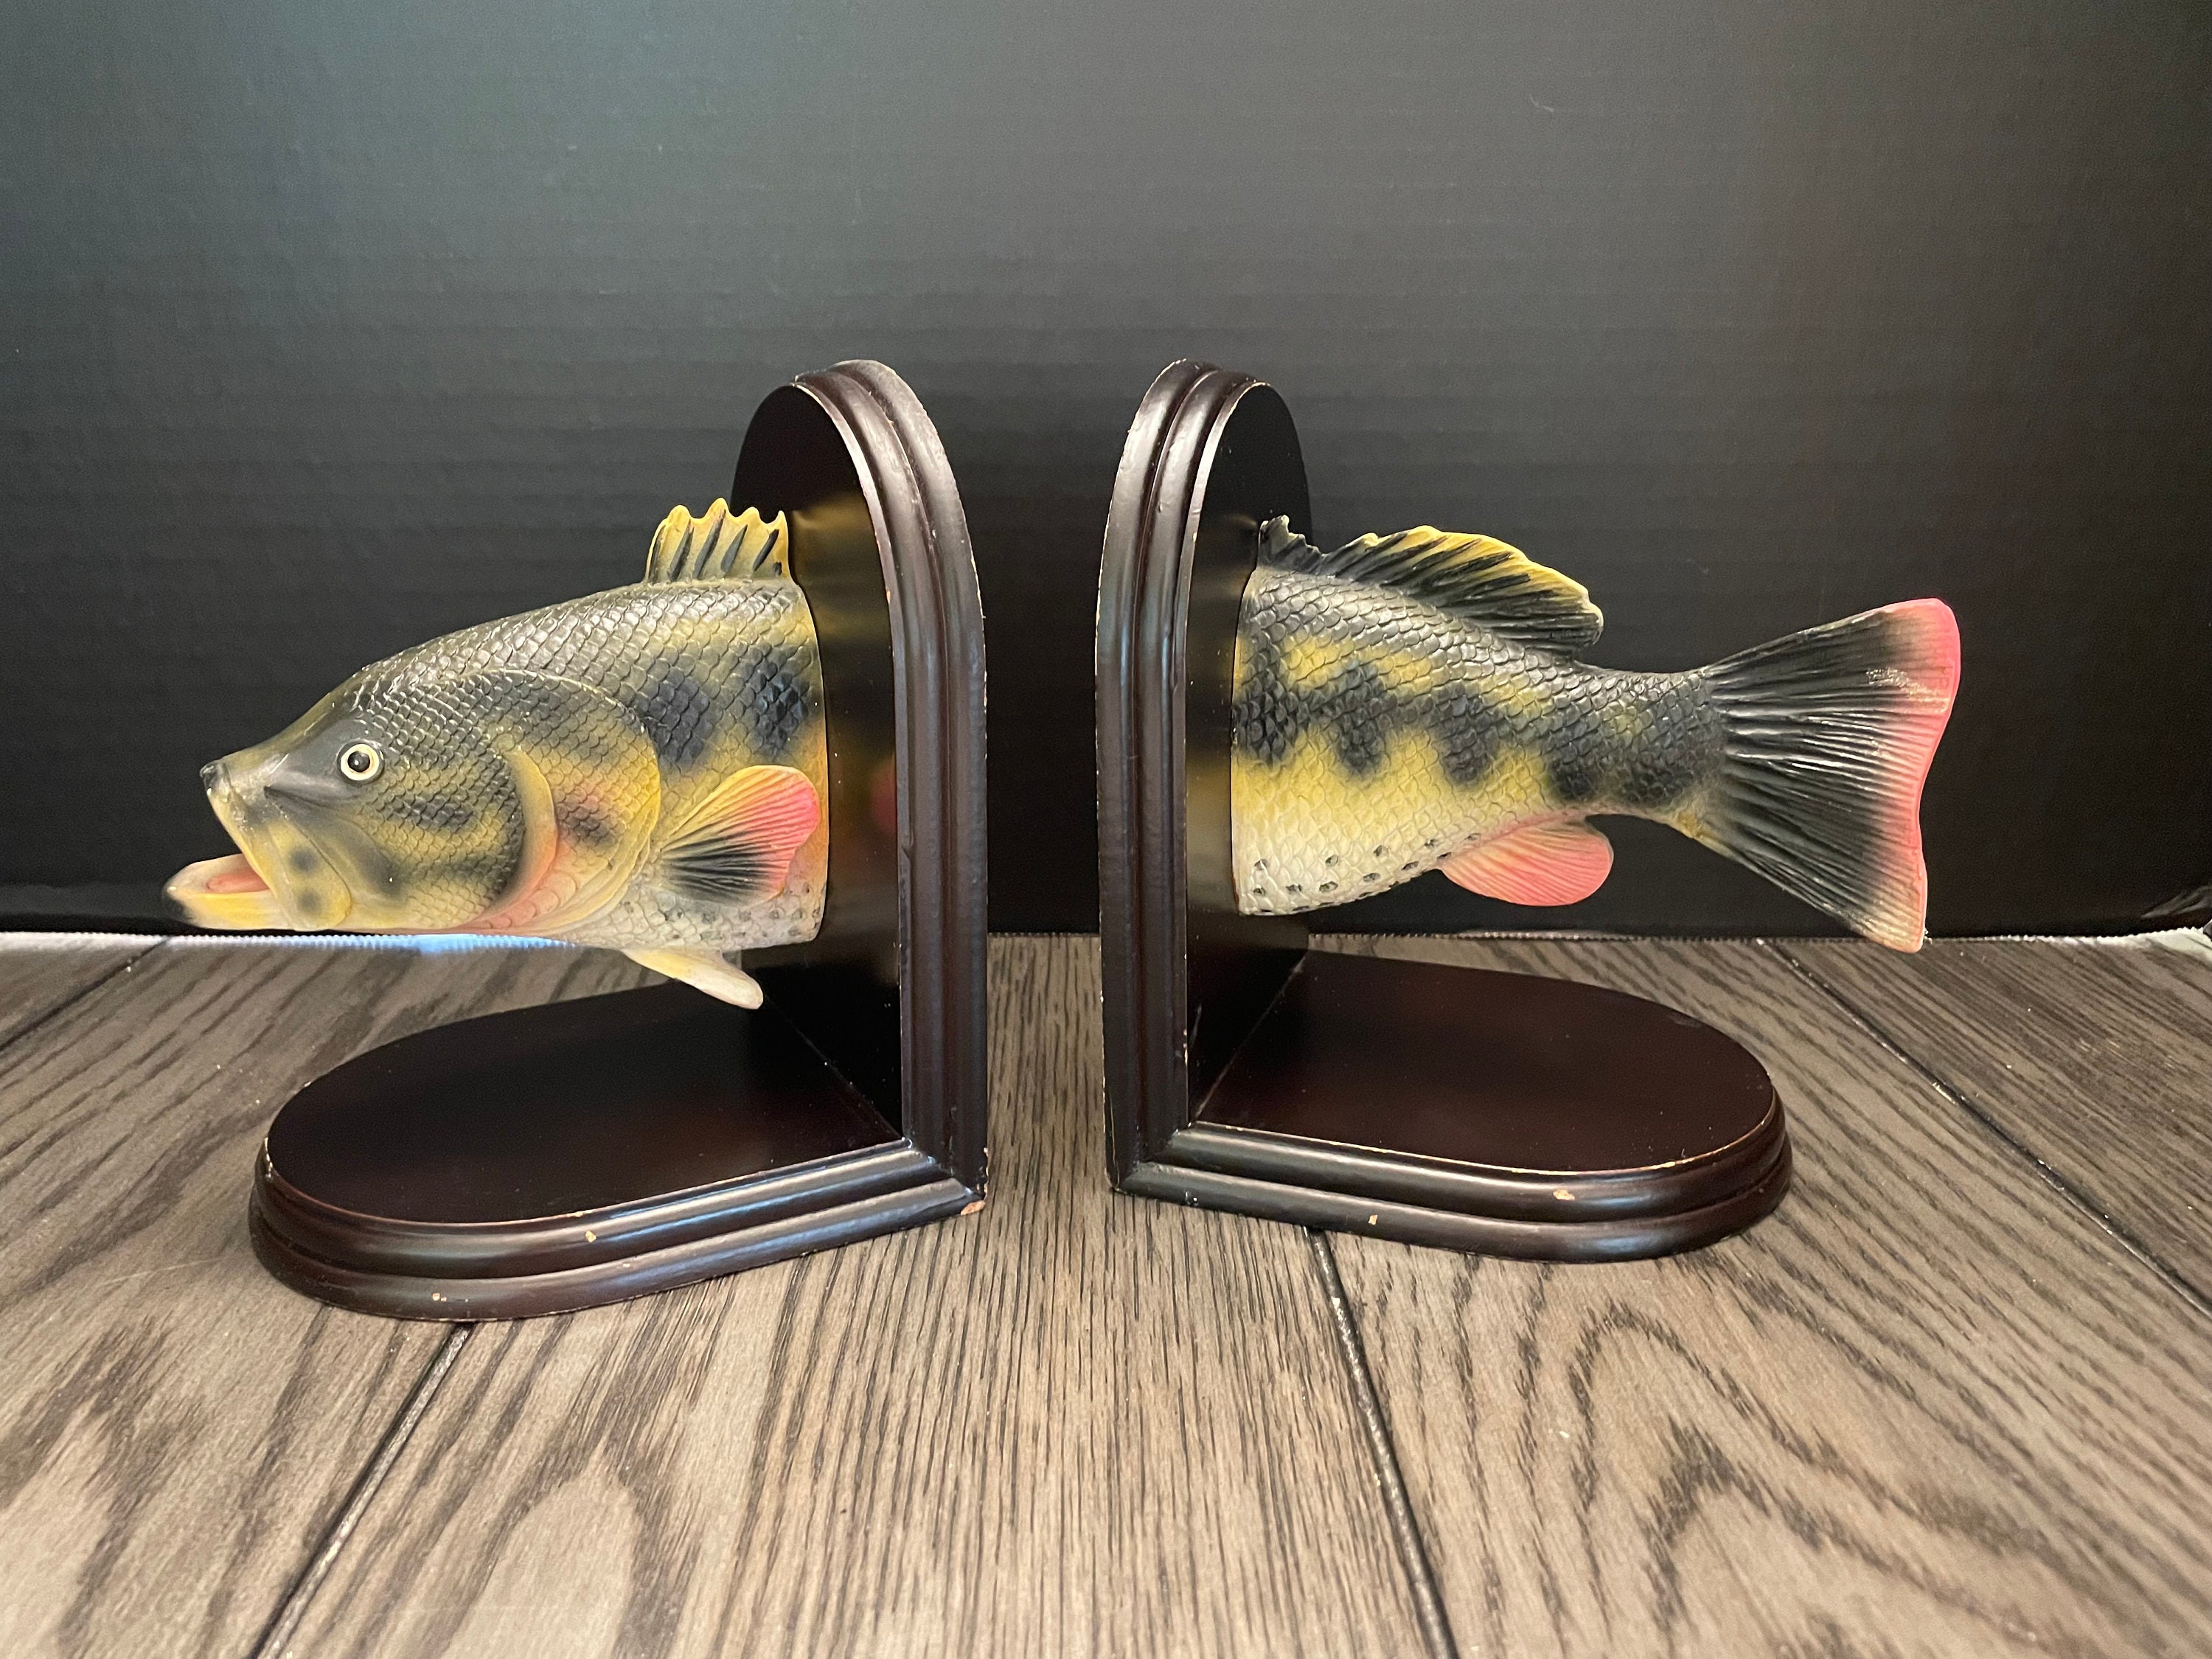 Vintage Fish Bookends